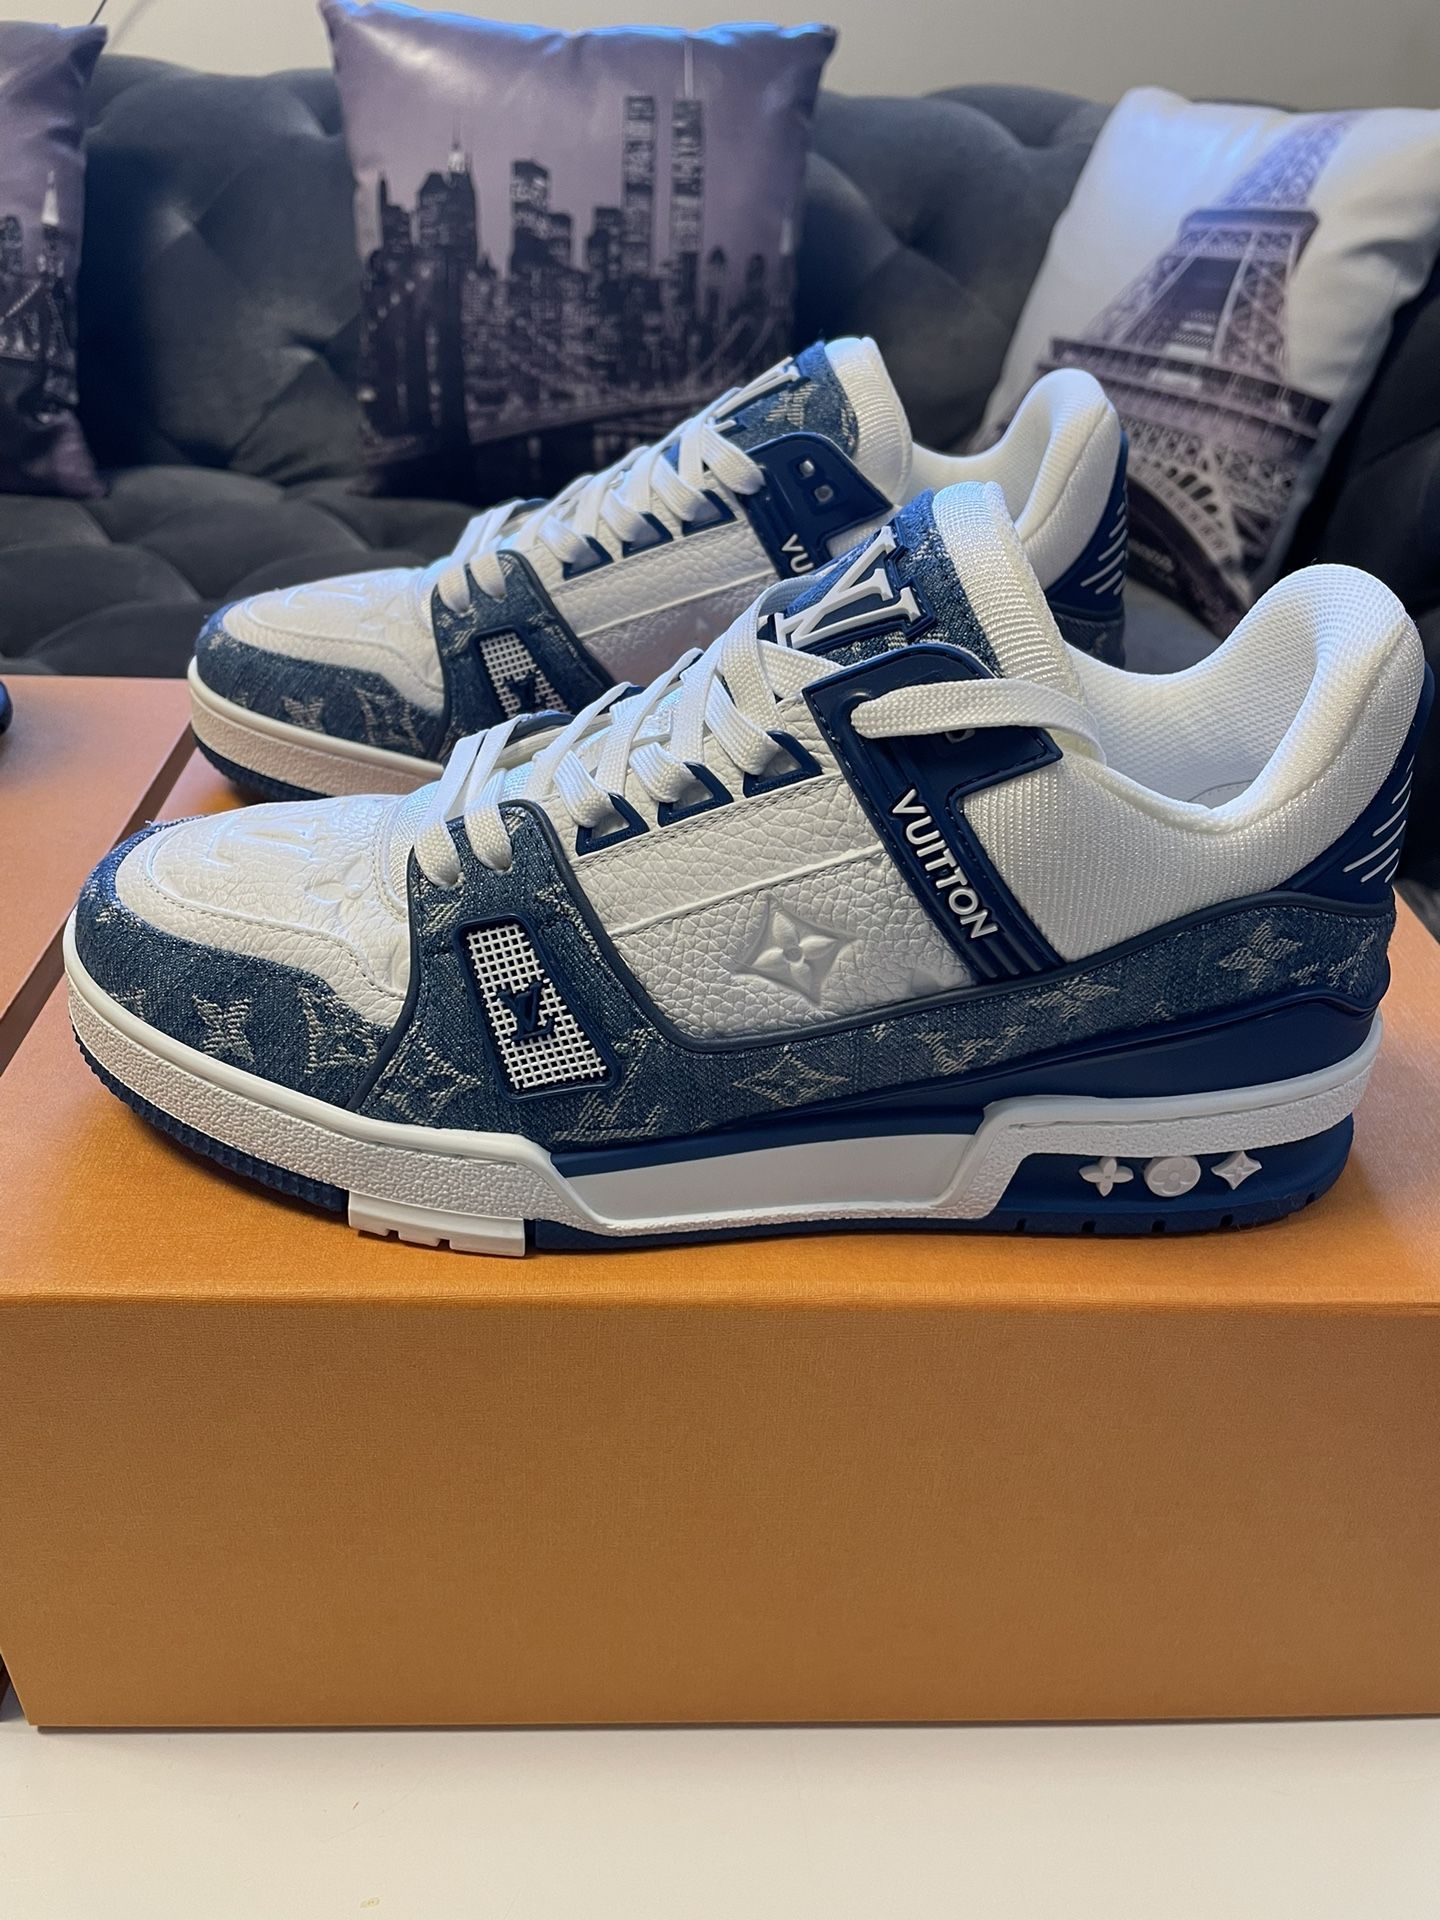 New Louis Vuitton Trainer #54 Graphic Print Blue/White Sneakers (Euro  44/Men's 10-11) for Sale in Valley Stream, NY - OfferUp